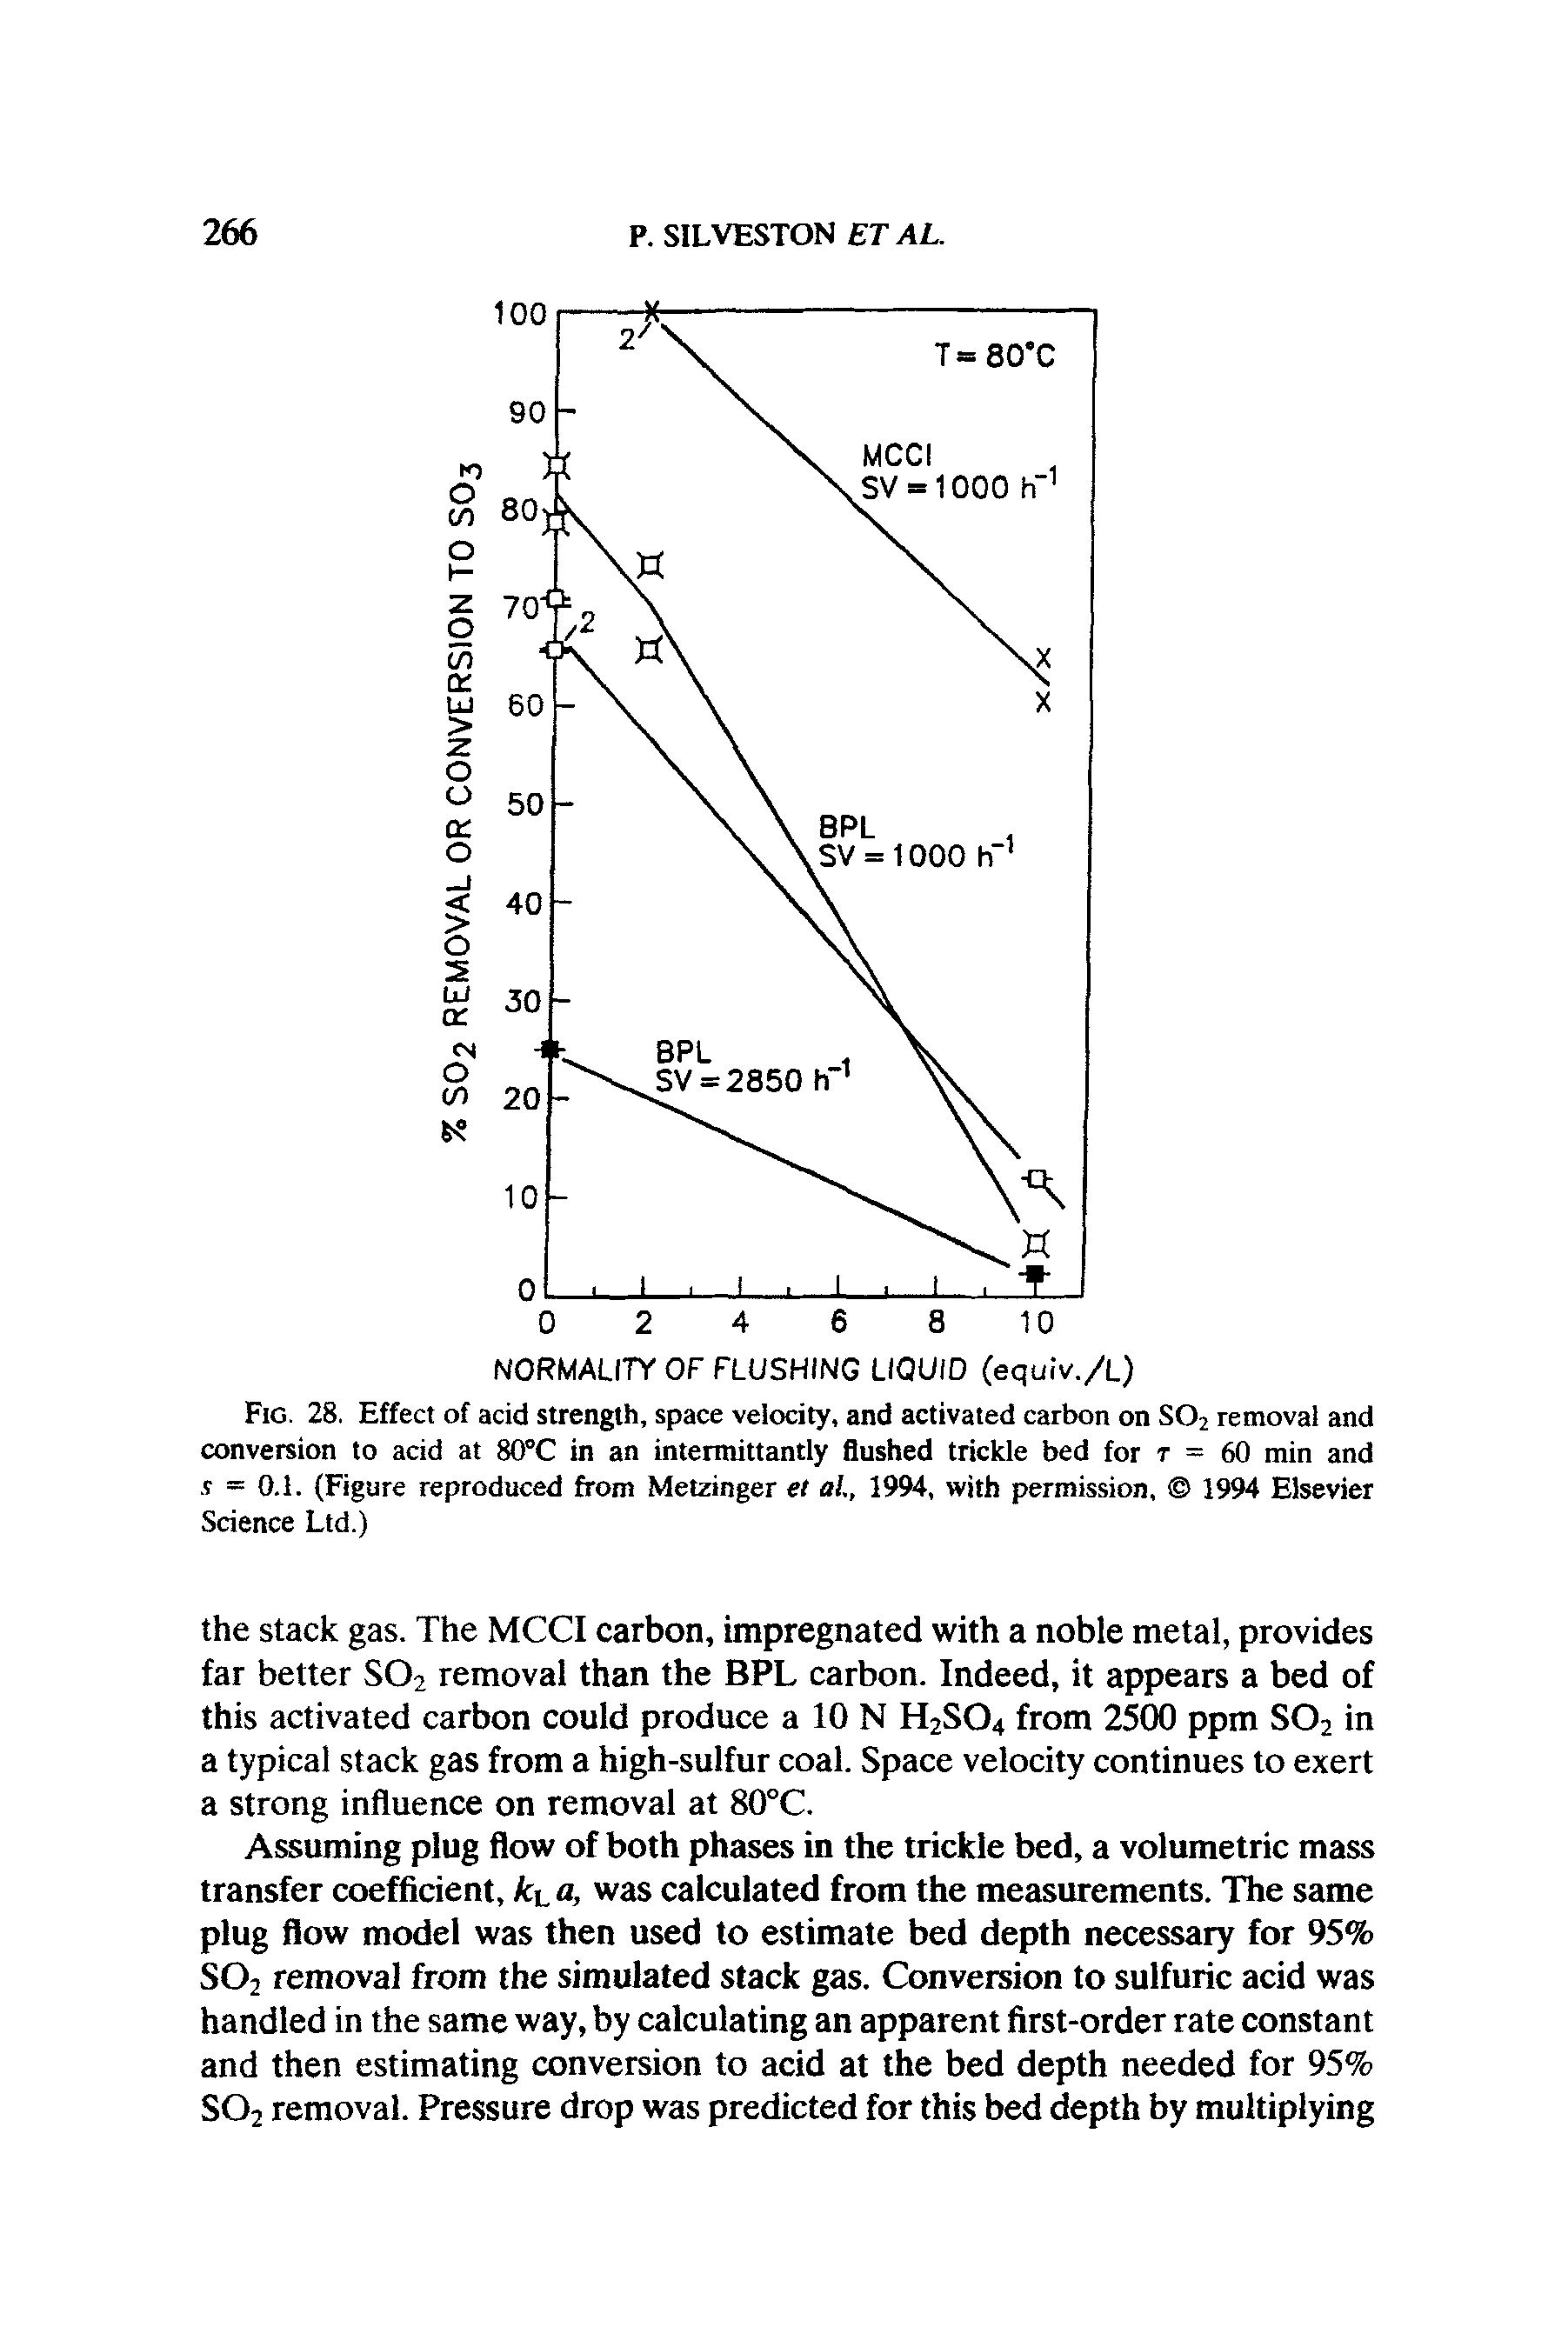 Fig. 28. Effect of acid strength, space velocity, and activated carbon on S02 removal and conversion to acid at 80°C in an intermittantly flushed trickle bed for r = 60 min and s = 0.1. (Figure reproduced from Metzinger et ai, 1994, with permission, 1994 Elsevier Science Ltd.)...